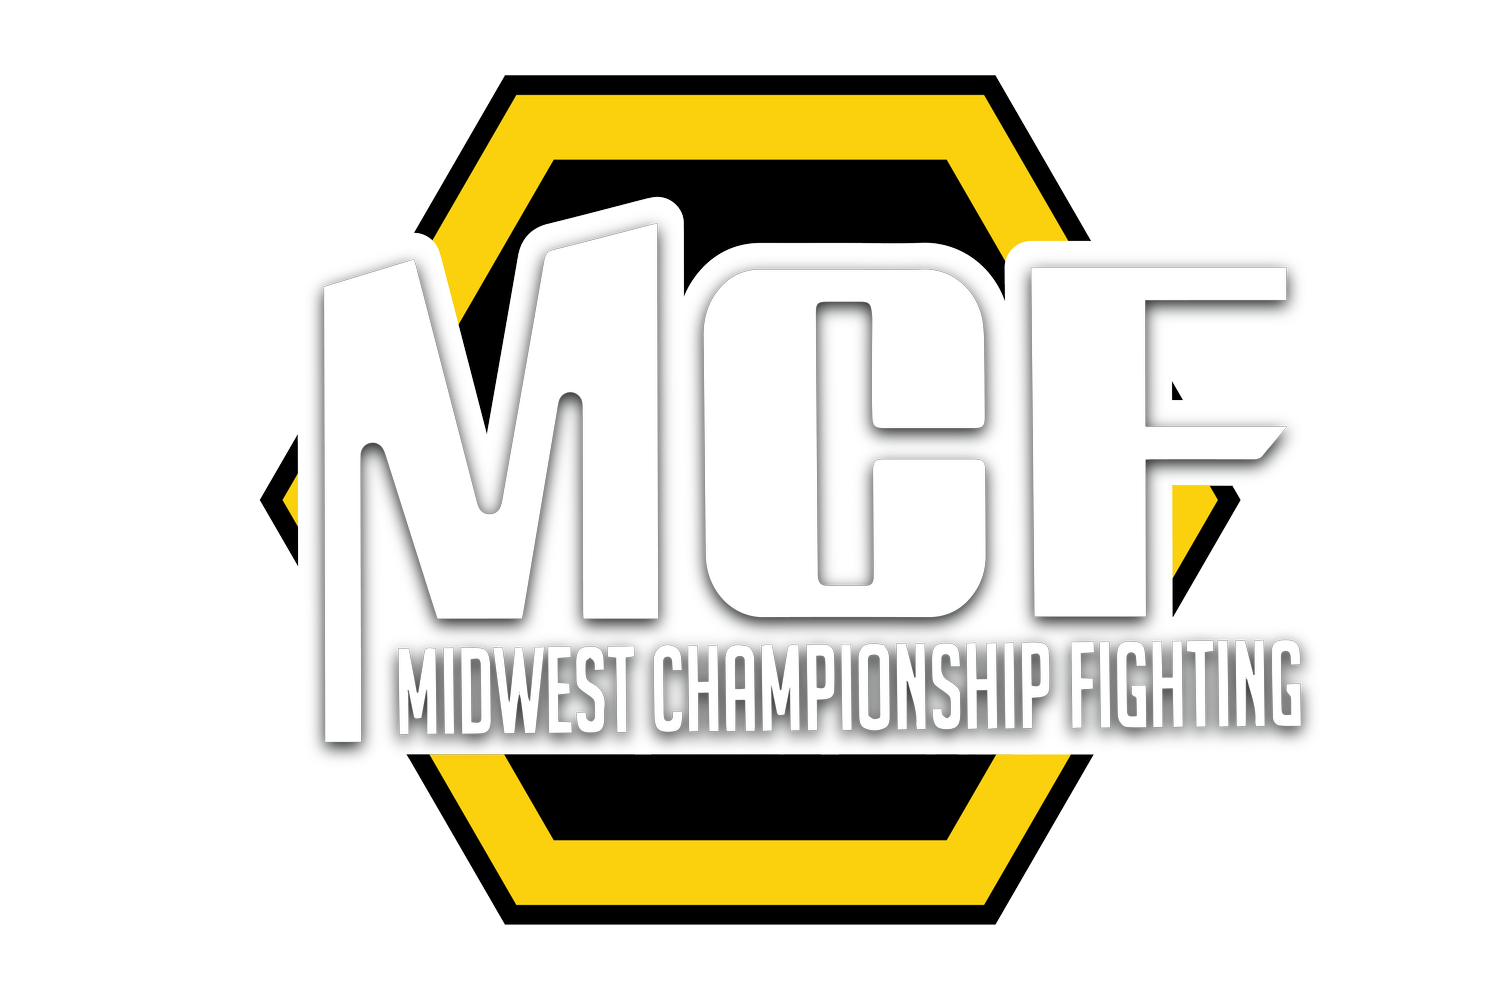 Midwest Championship Fighting